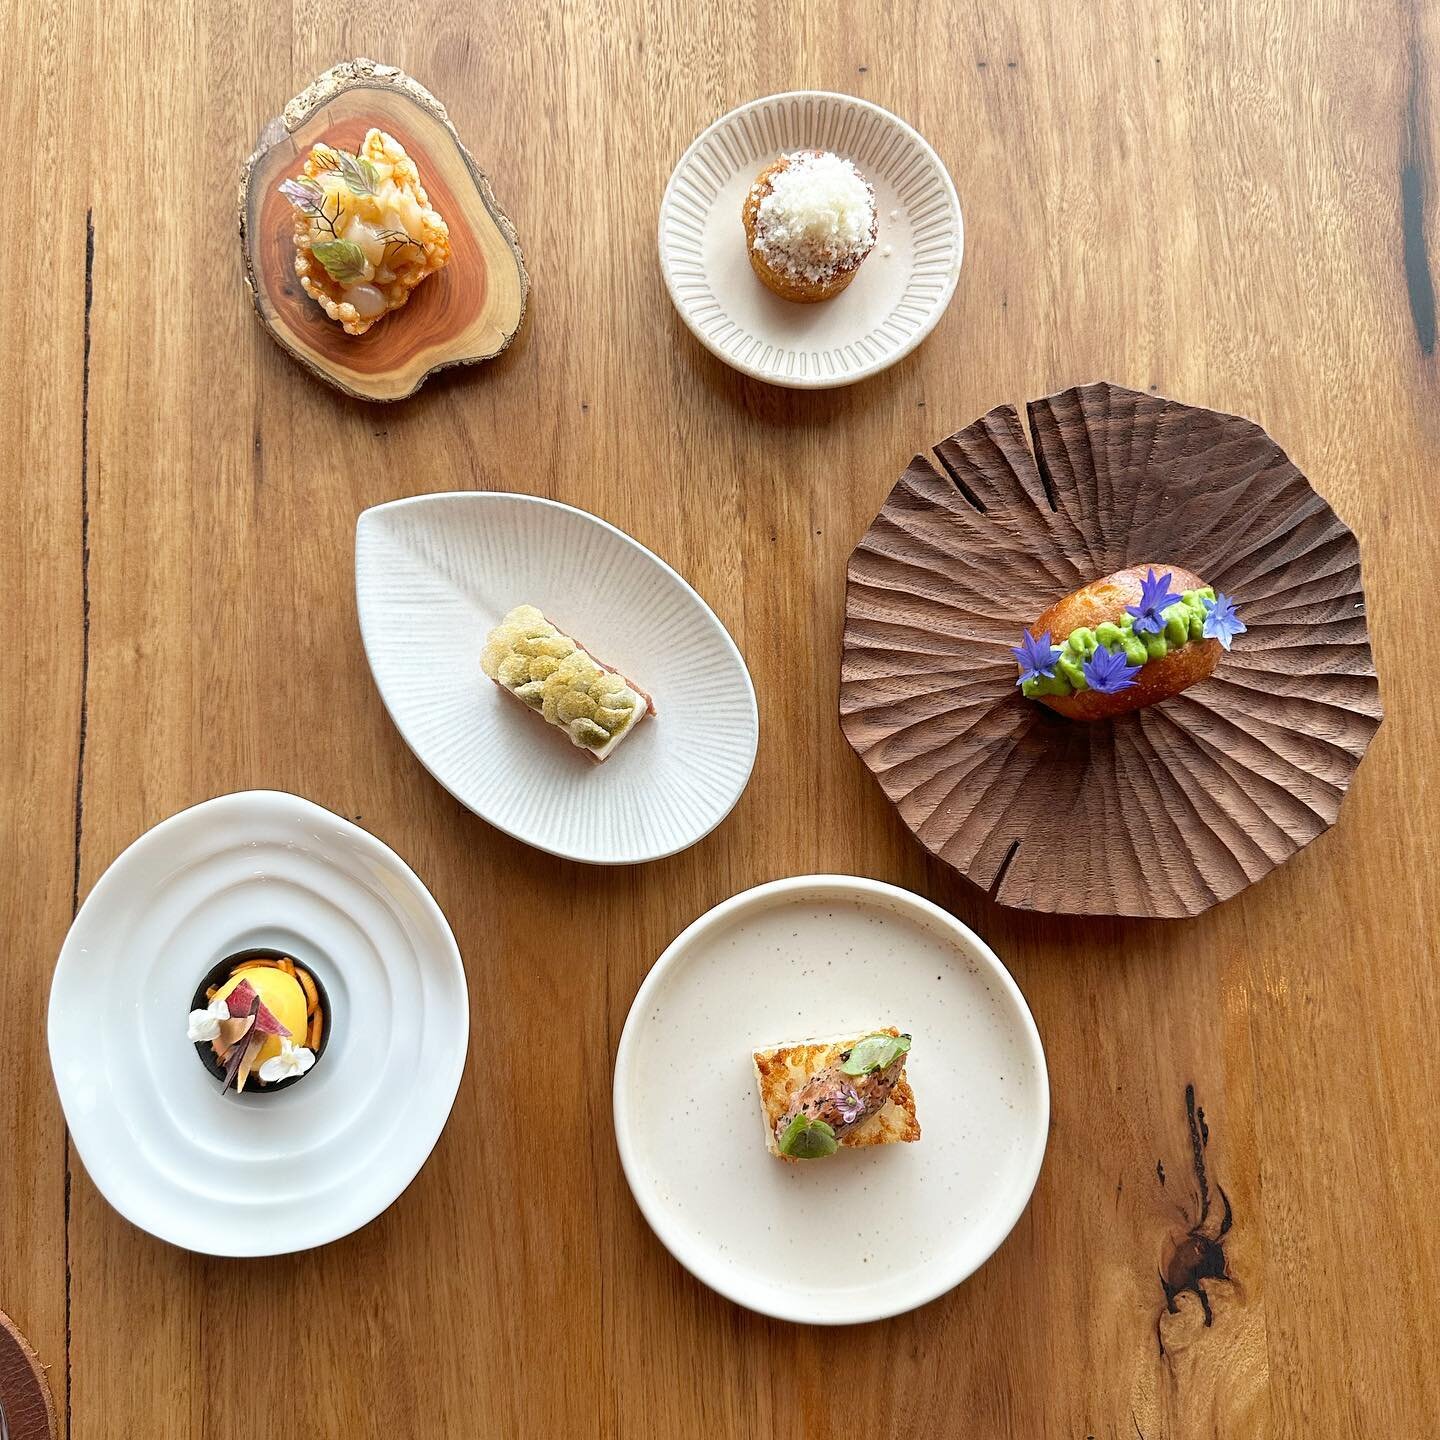 When you arrive at our restaurant, you receive some &laquo;&nbsp;amuse-bouches&nbsp;&raquo;, they give you a little taste of what  is coming&hellip;